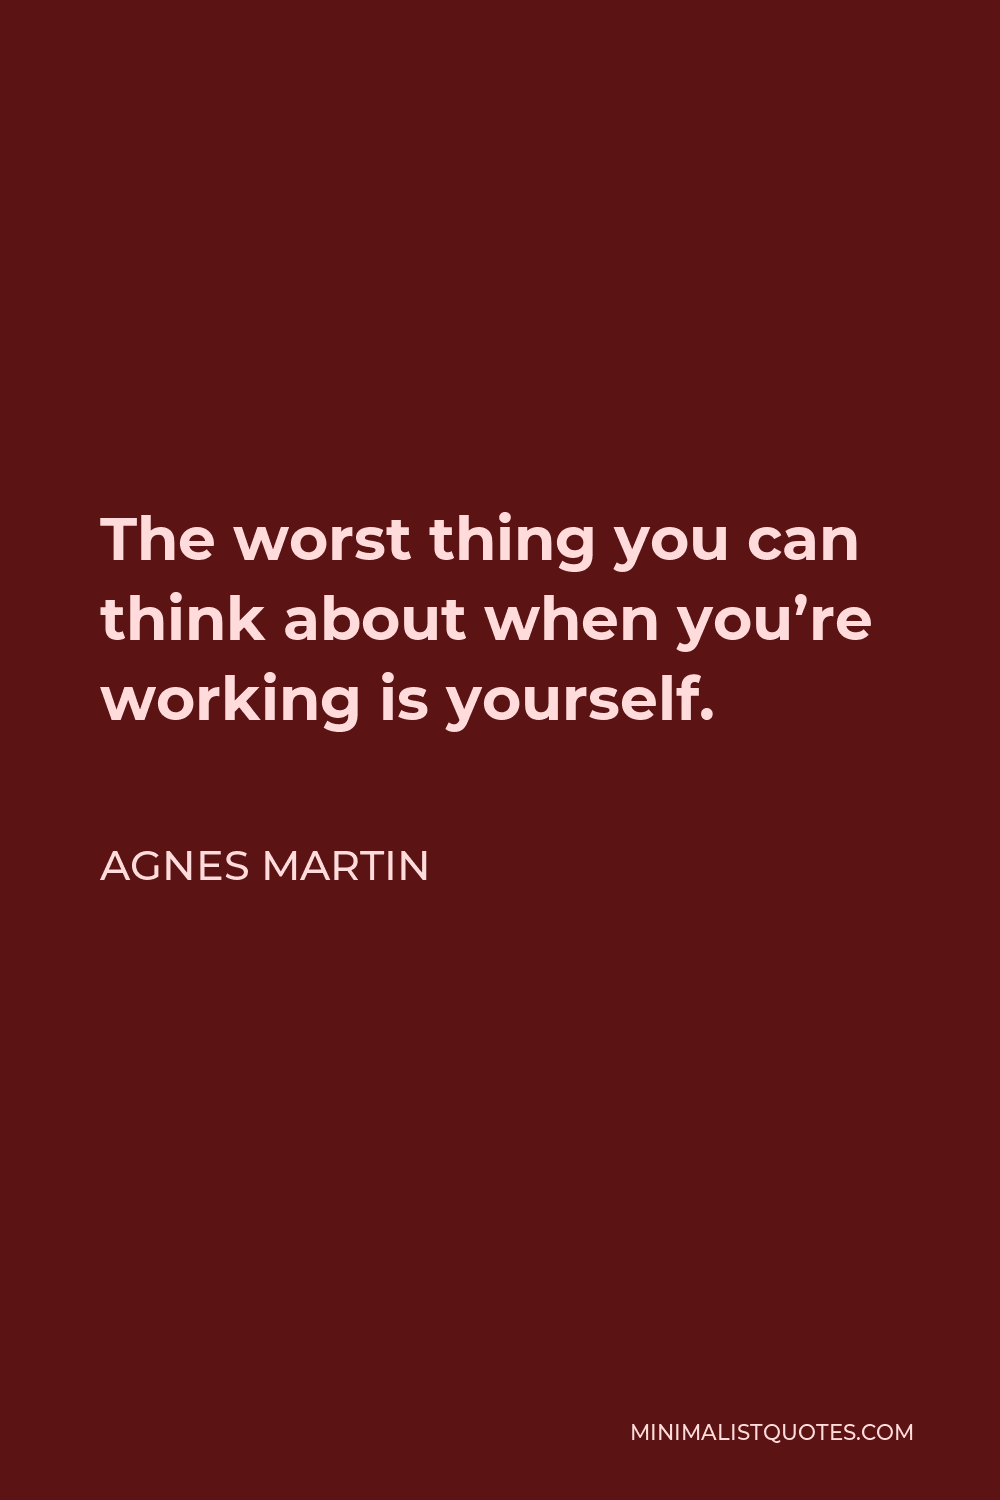 Agnes Martin Quote - The worst thing you can think about when you’re working is yourself.